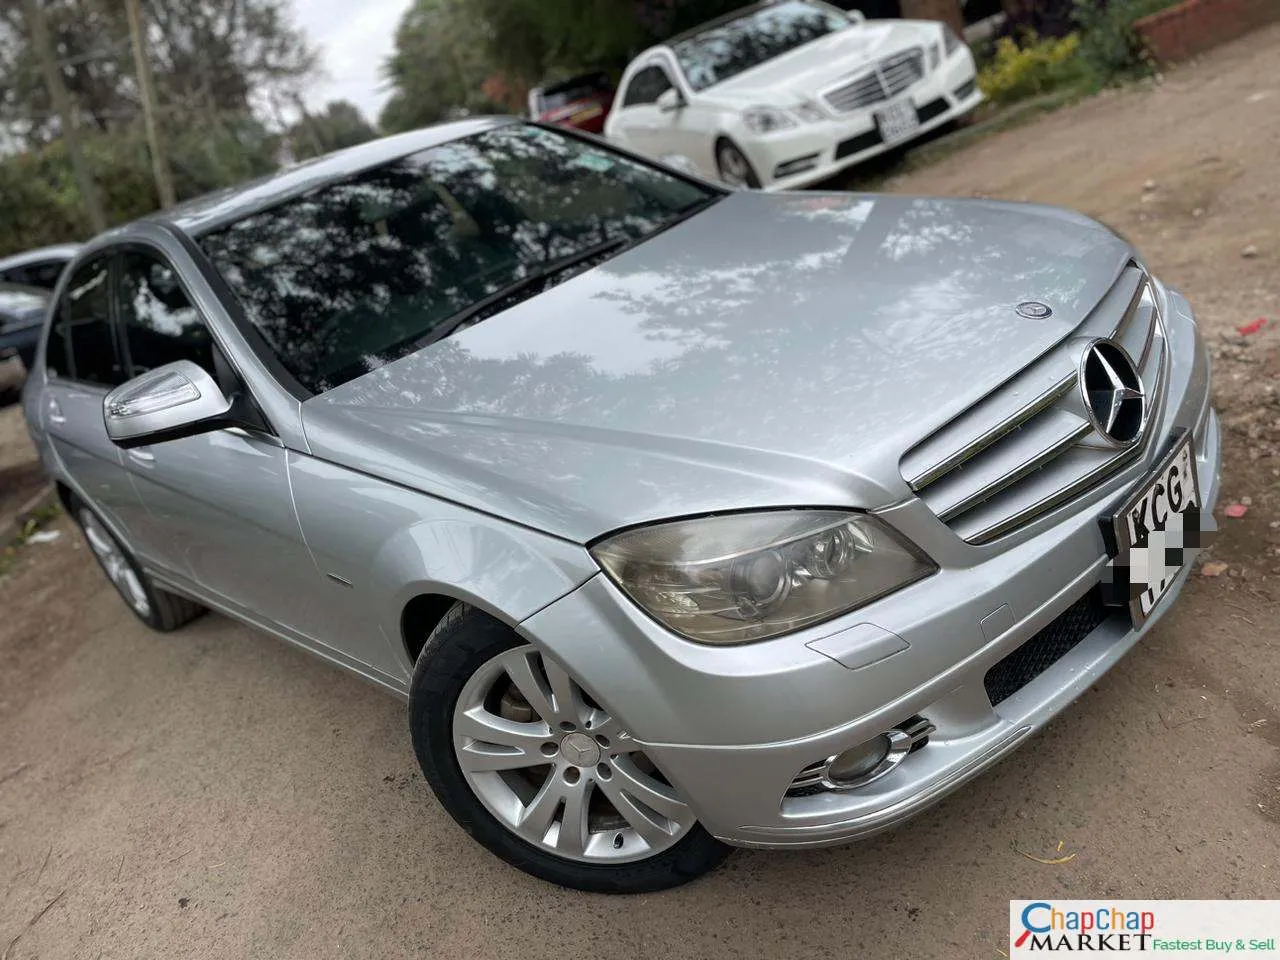 Mercedes Benz C200 for sale in Kenya 🔥 You Pay 30% DEPOSIT Trade in OK EXCLUSIVE